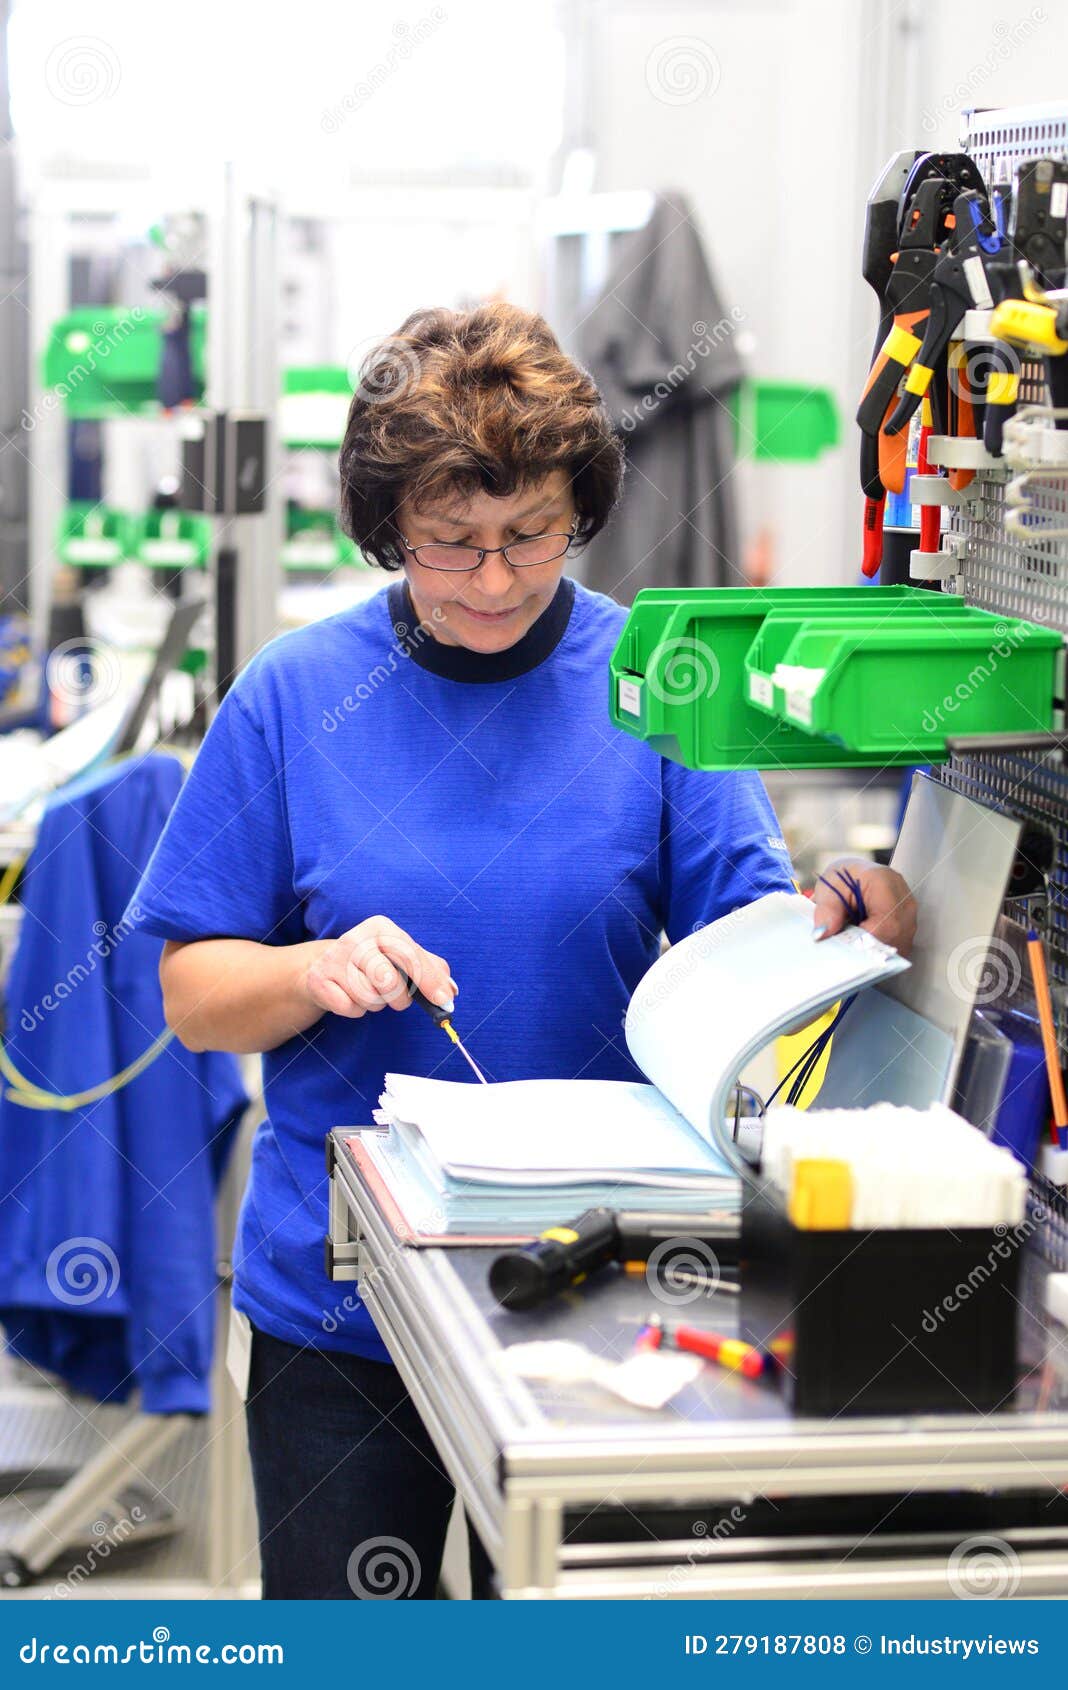 production and assembly of microelectronics in a hi-tech factory - older woman assembles components